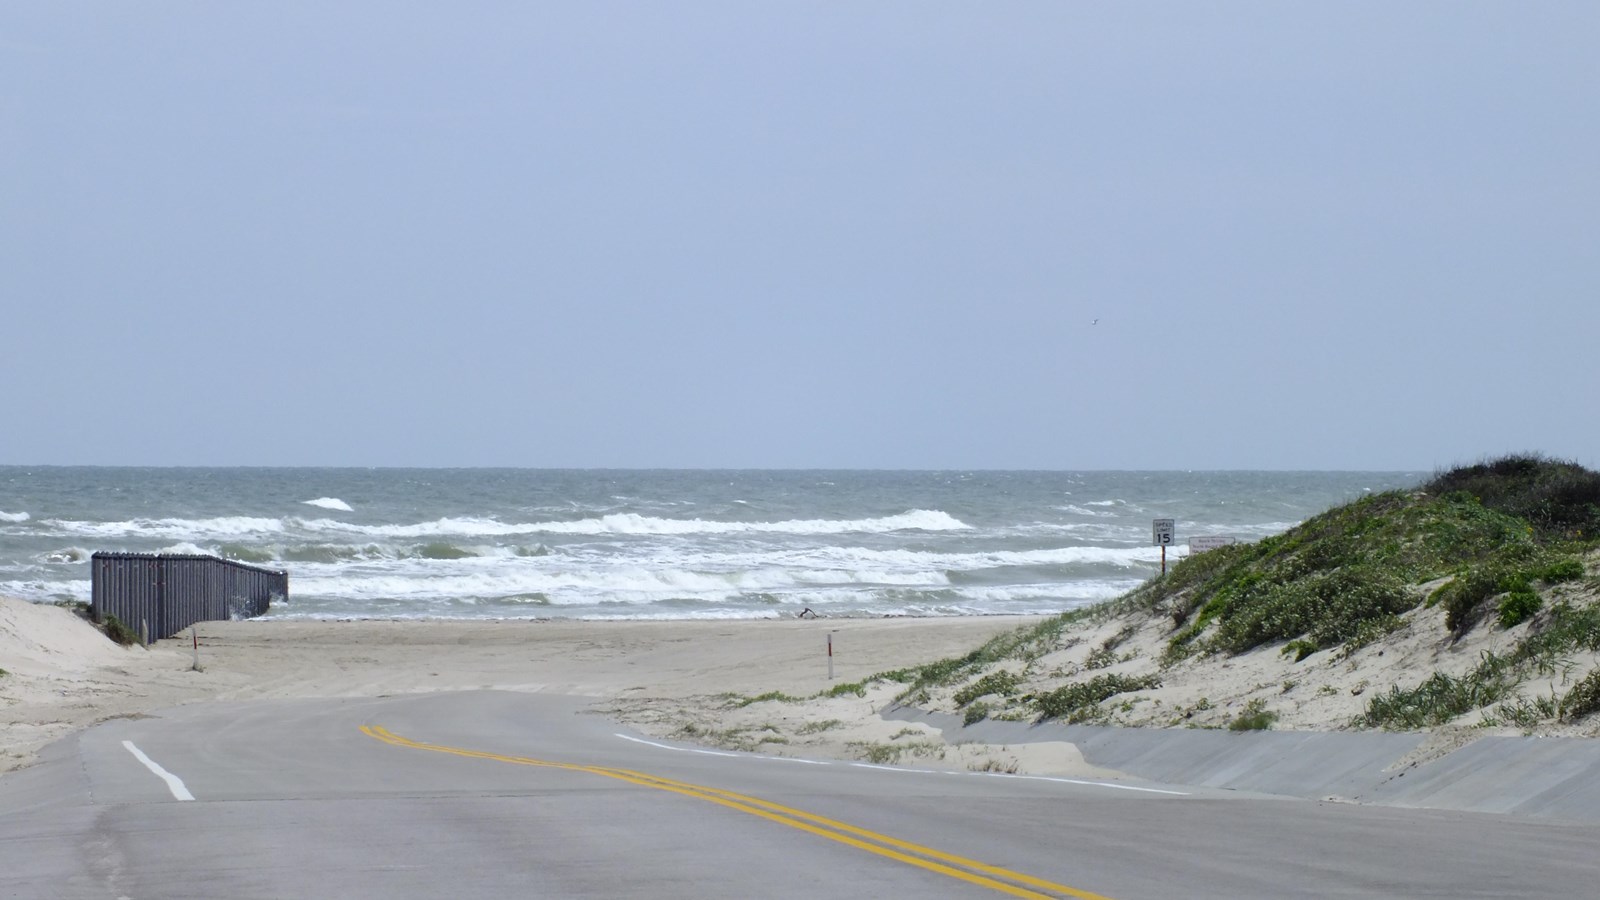 The paved road ends and turns into beach. The gulf is ahead. Bollards block the beach to the left.